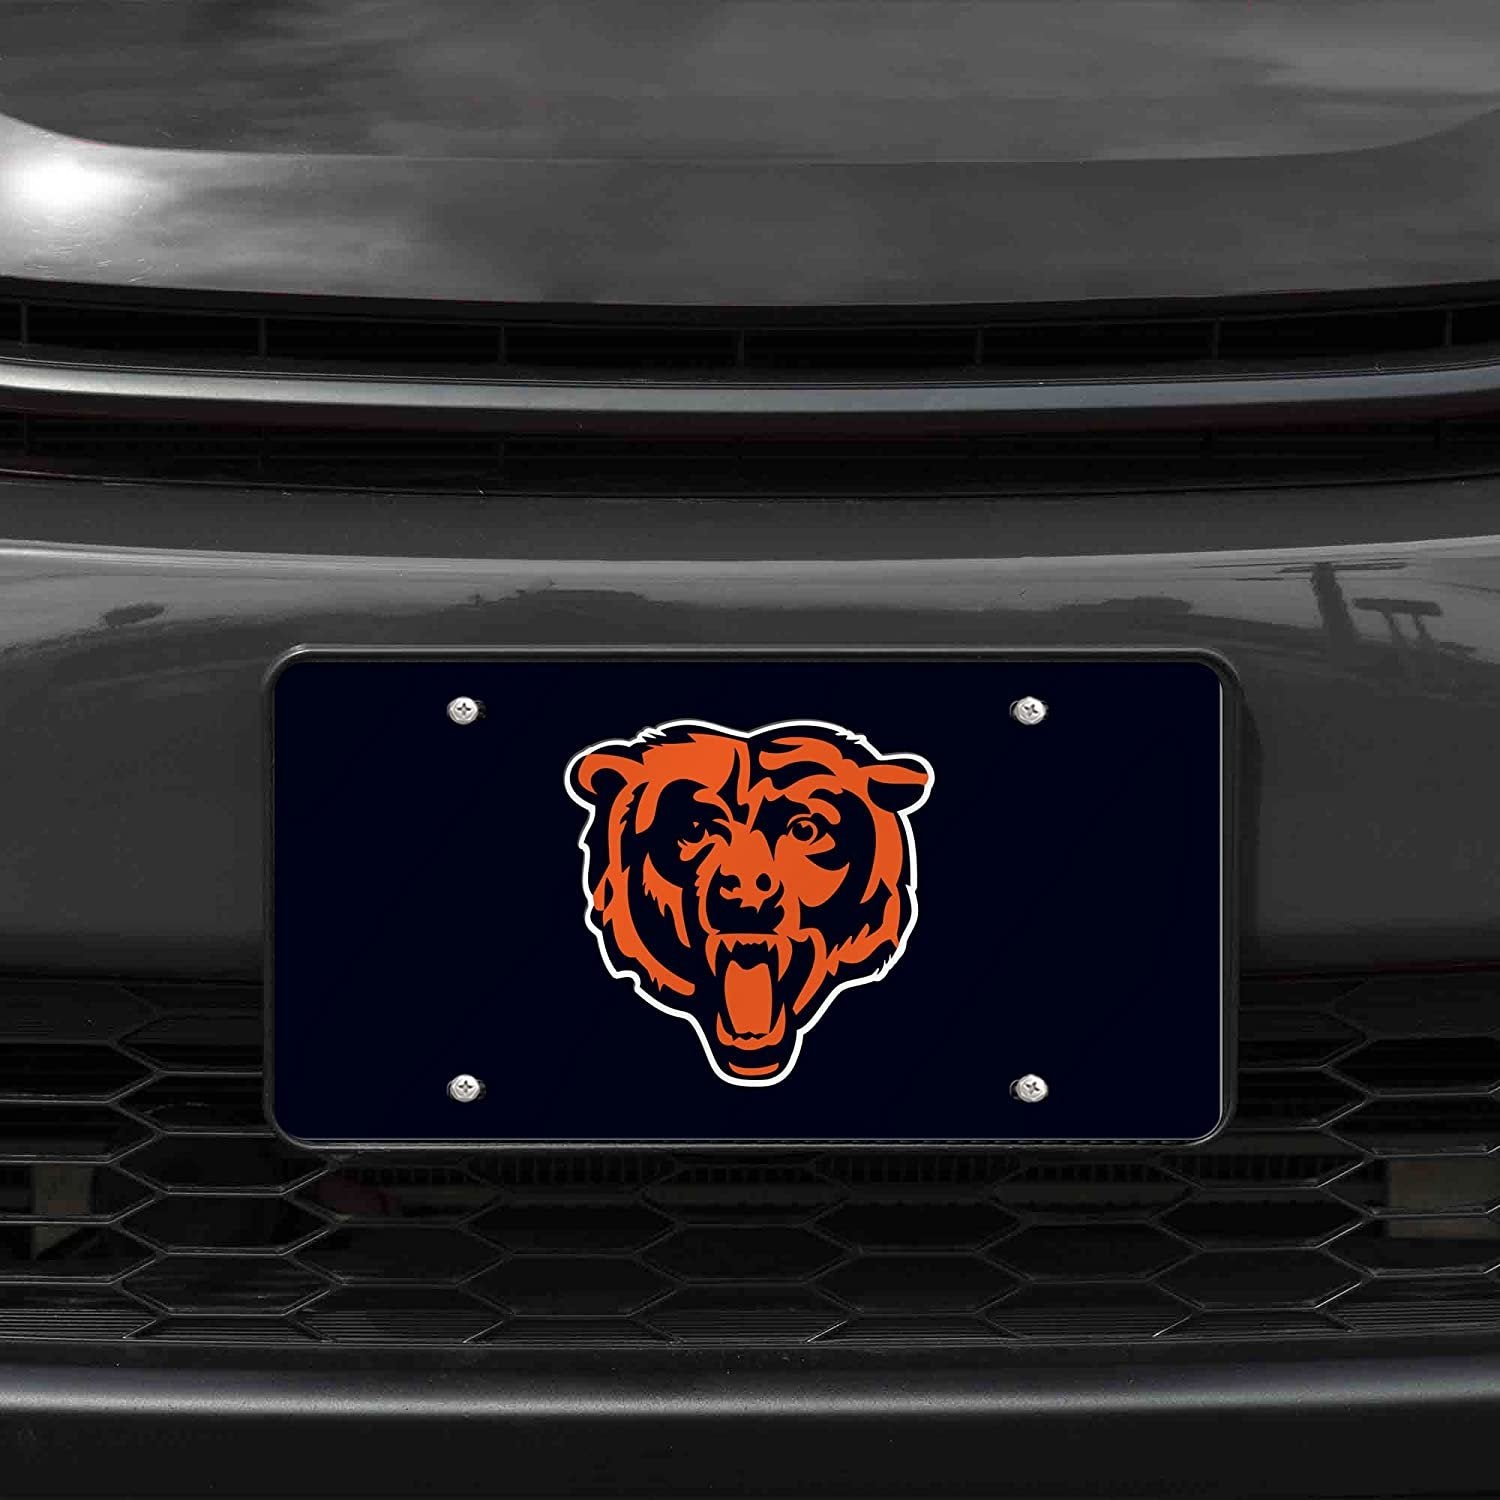 Chicago Bears Premium Laser Cut Tag License Plate, Mascot, Blue Mirrored Acrylic Inlaid, 12x6 Inch